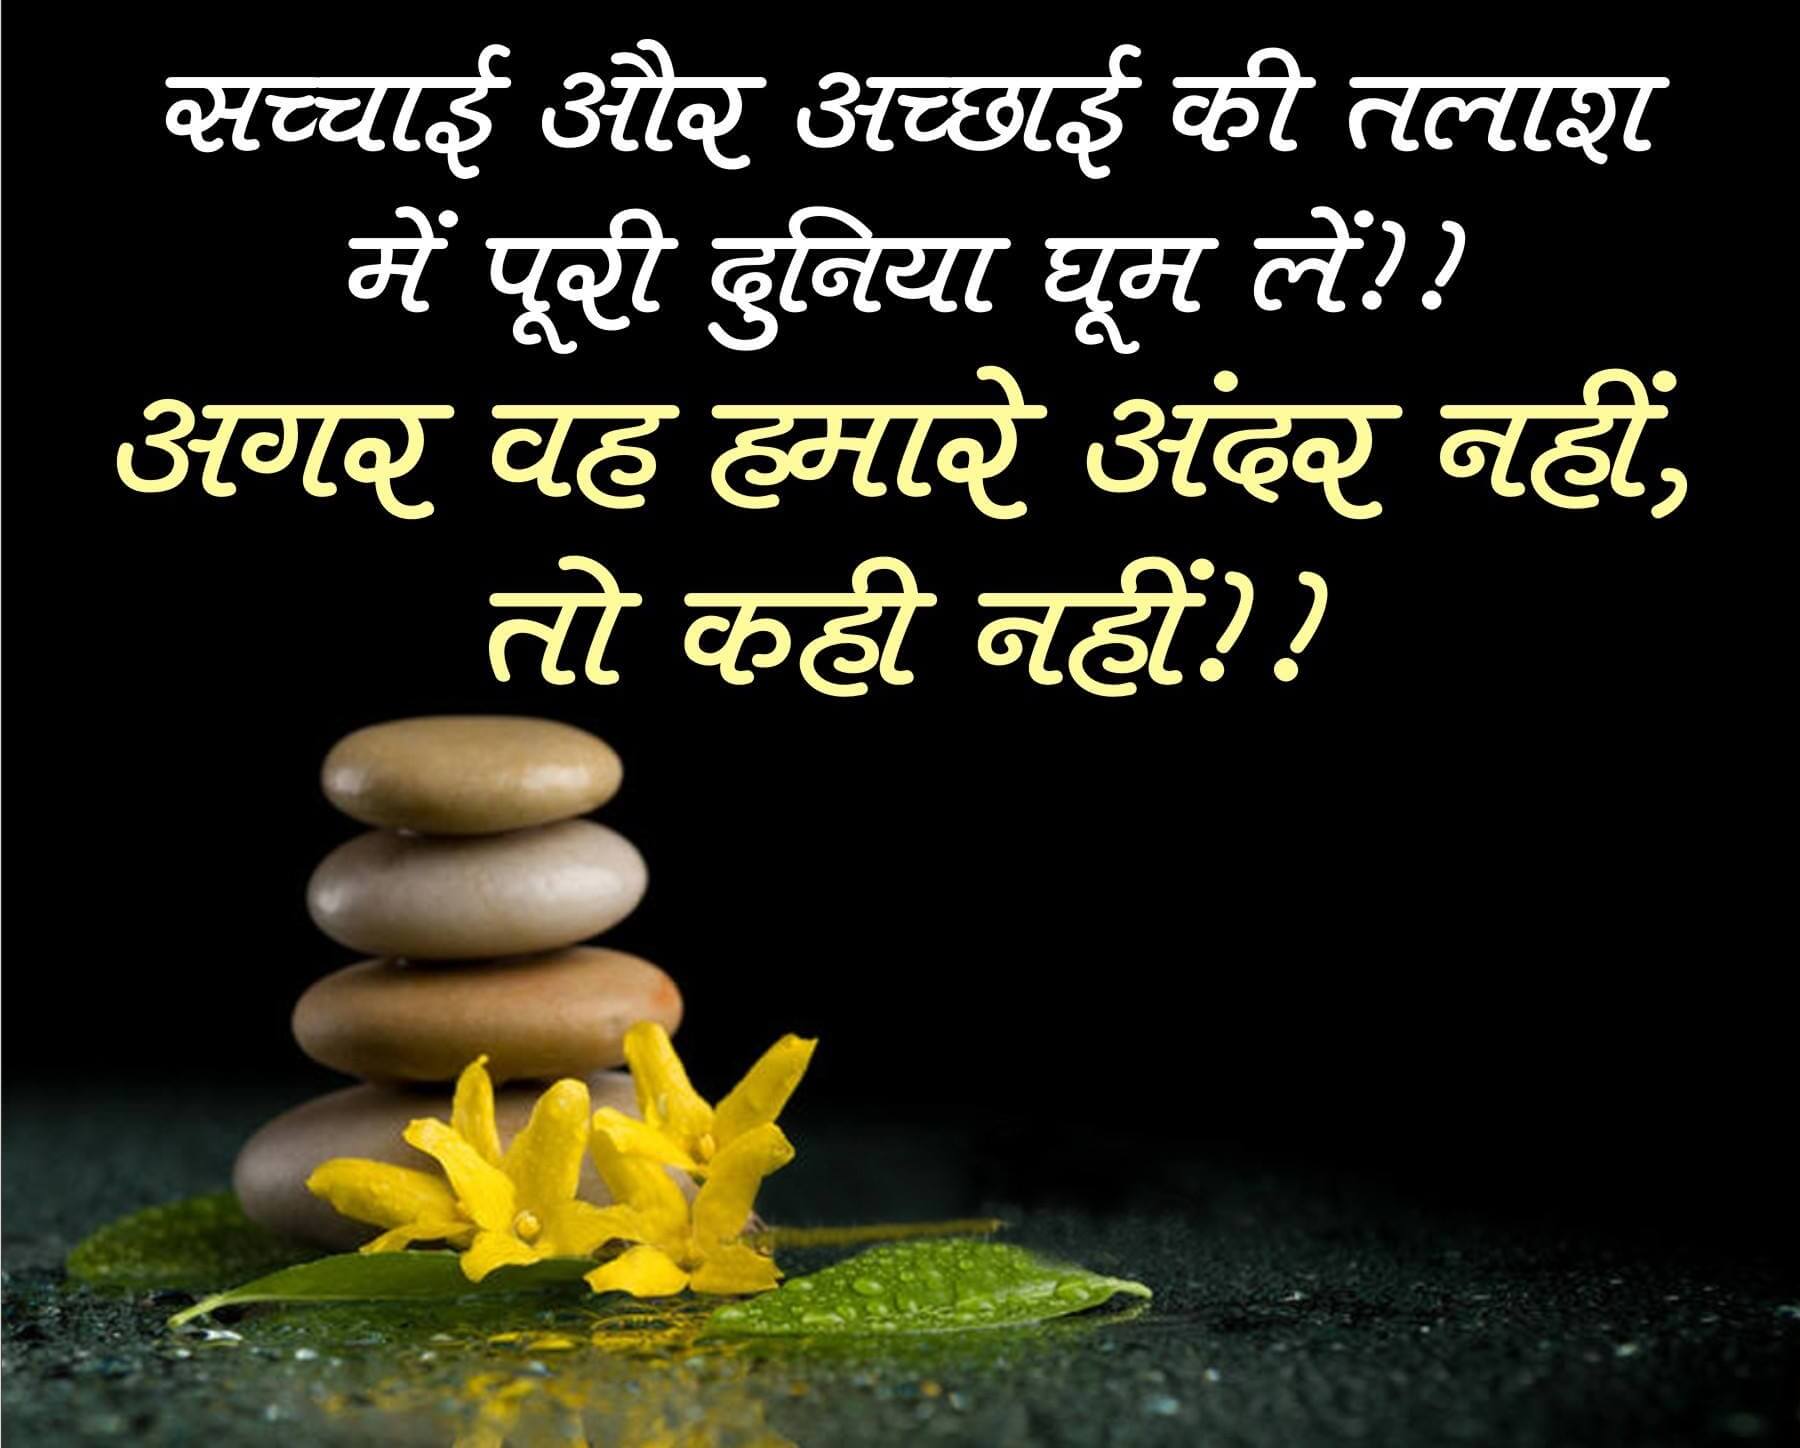 Hindi Motivational Picture Quotes